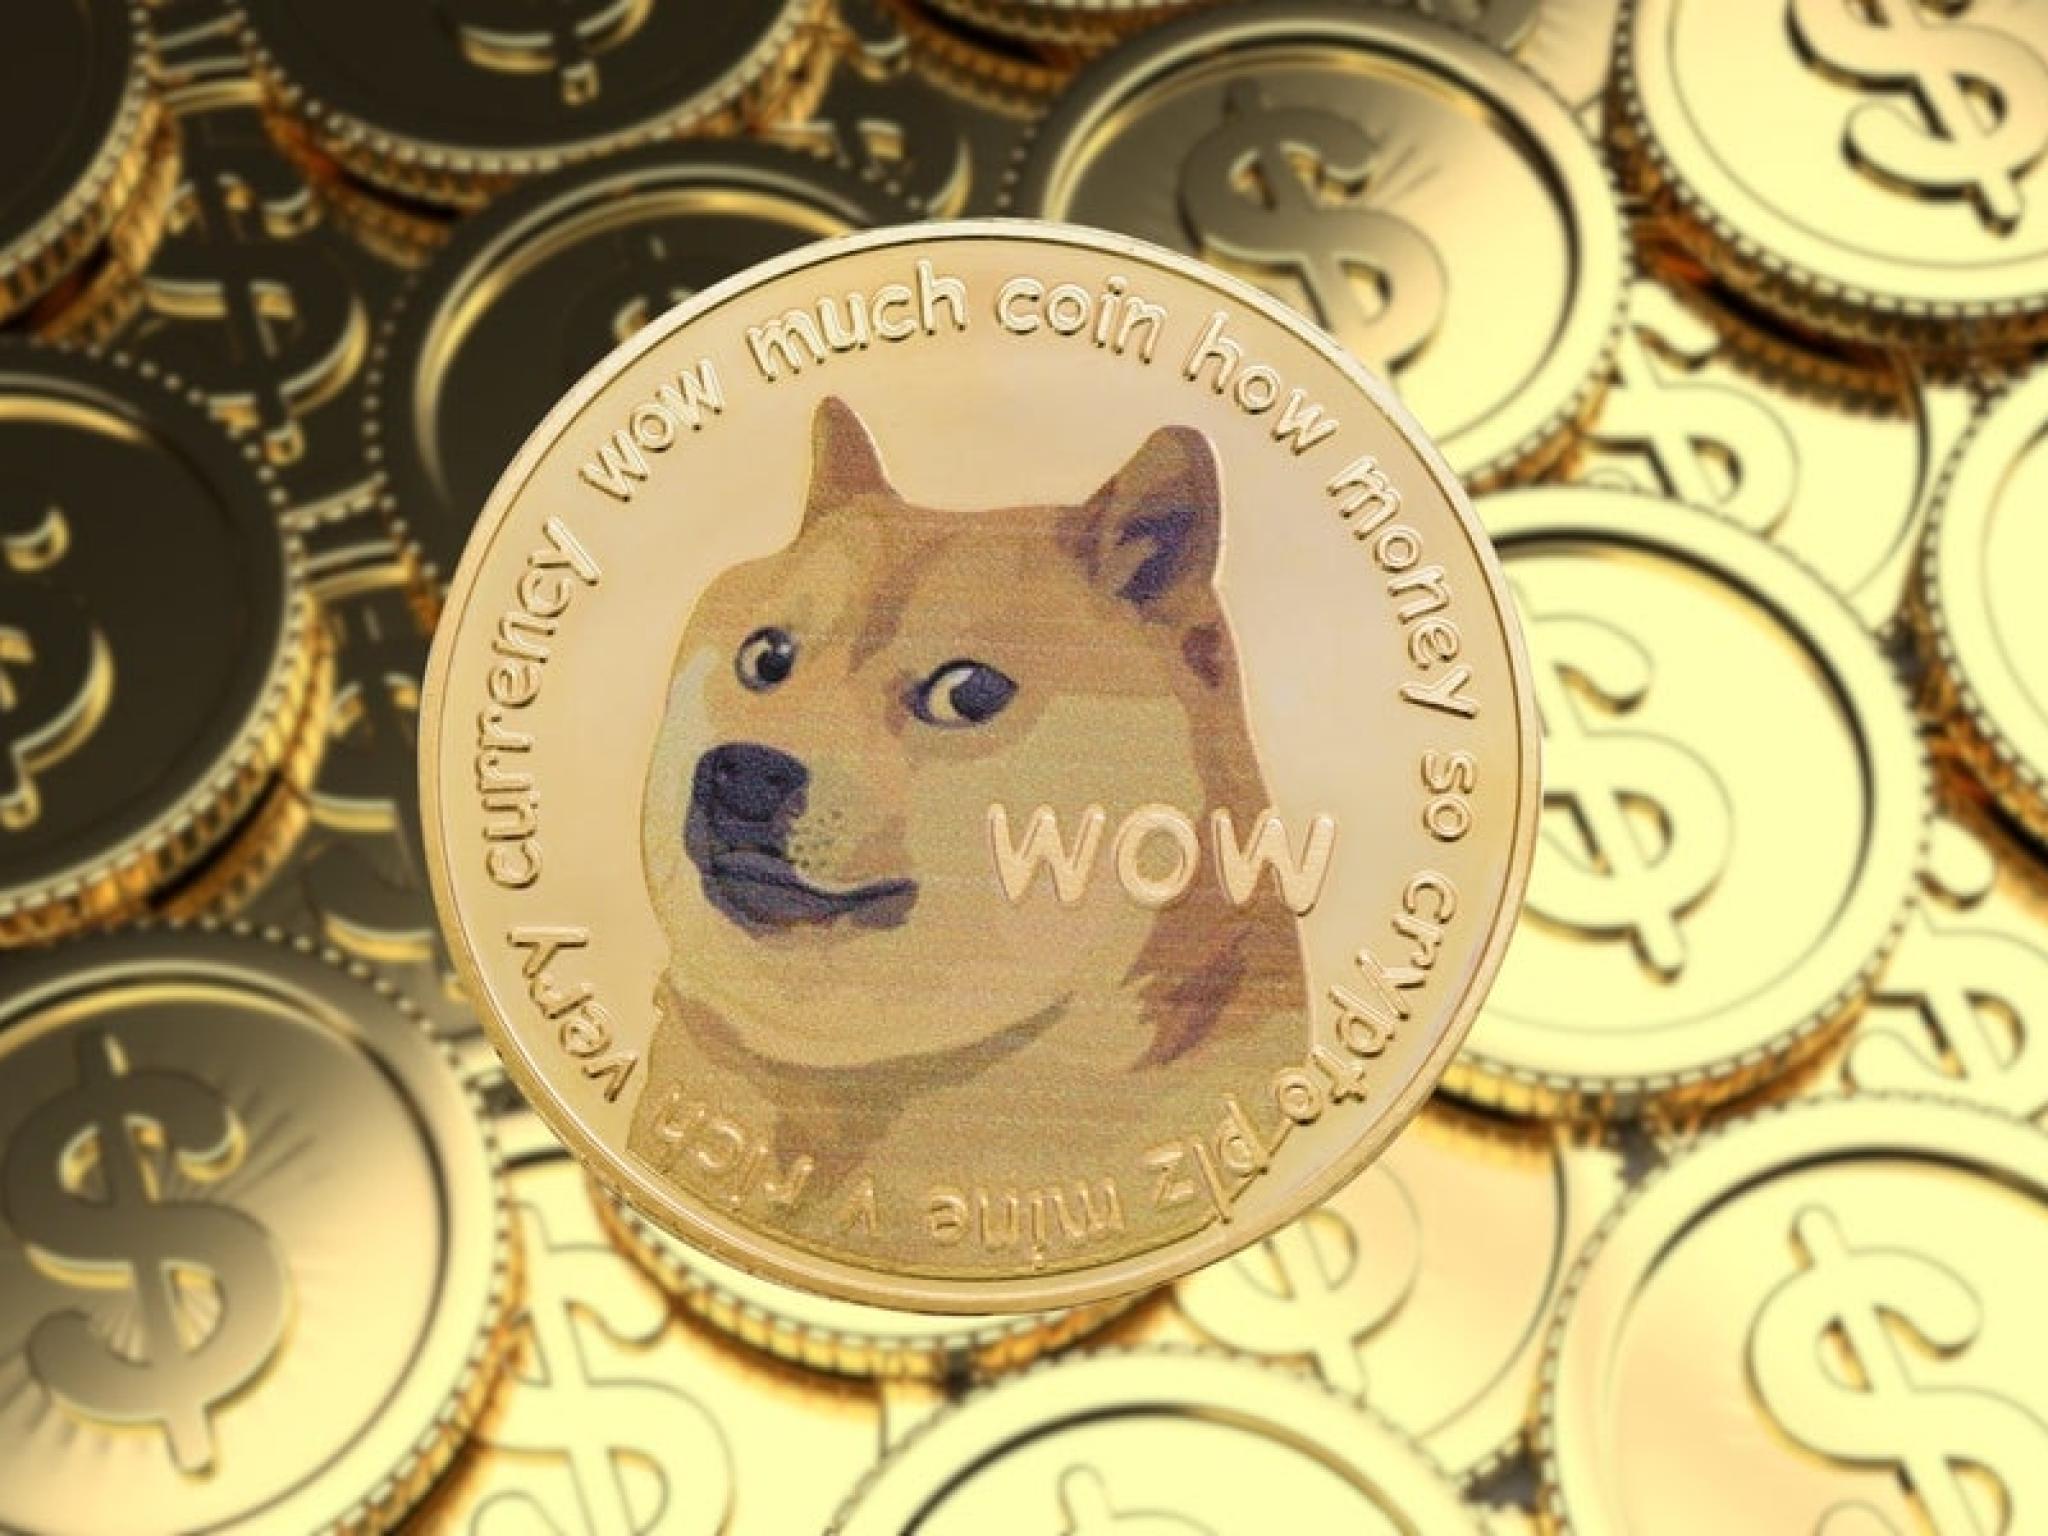  meme-coins-are-a-pure-ponzi-and-destroying-crypto-says-trader-who-thinks-dogecoin-was-different 